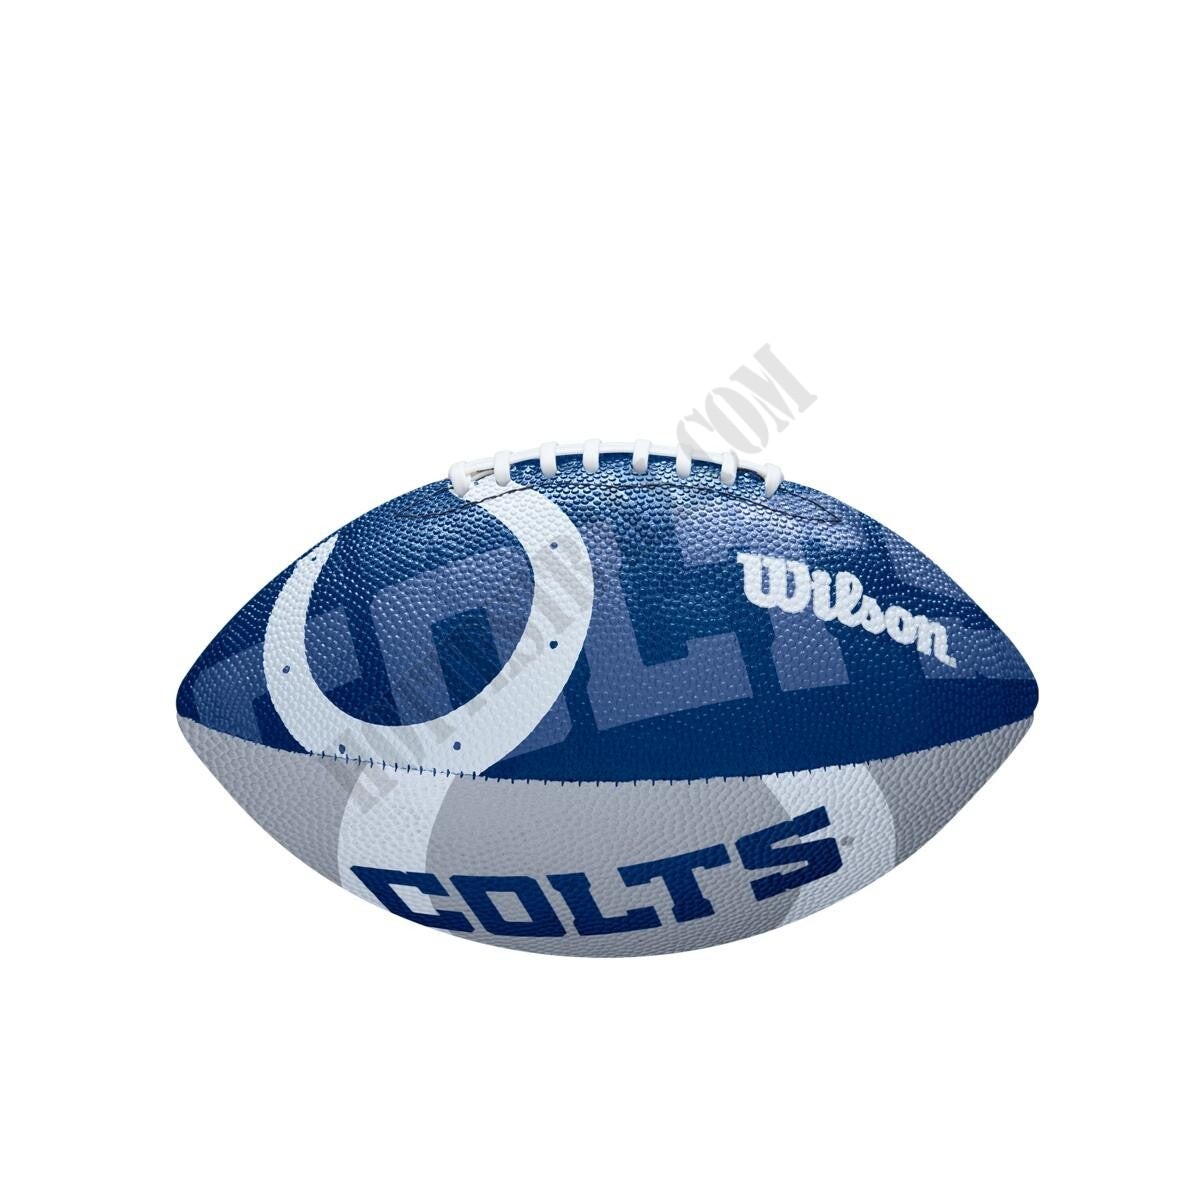 NFL Team Tailgate Football - Indianapolis Colts ● Wilson Promotions - NFL Team Tailgate Football - Indianapolis Colts ● Wilson Promotions